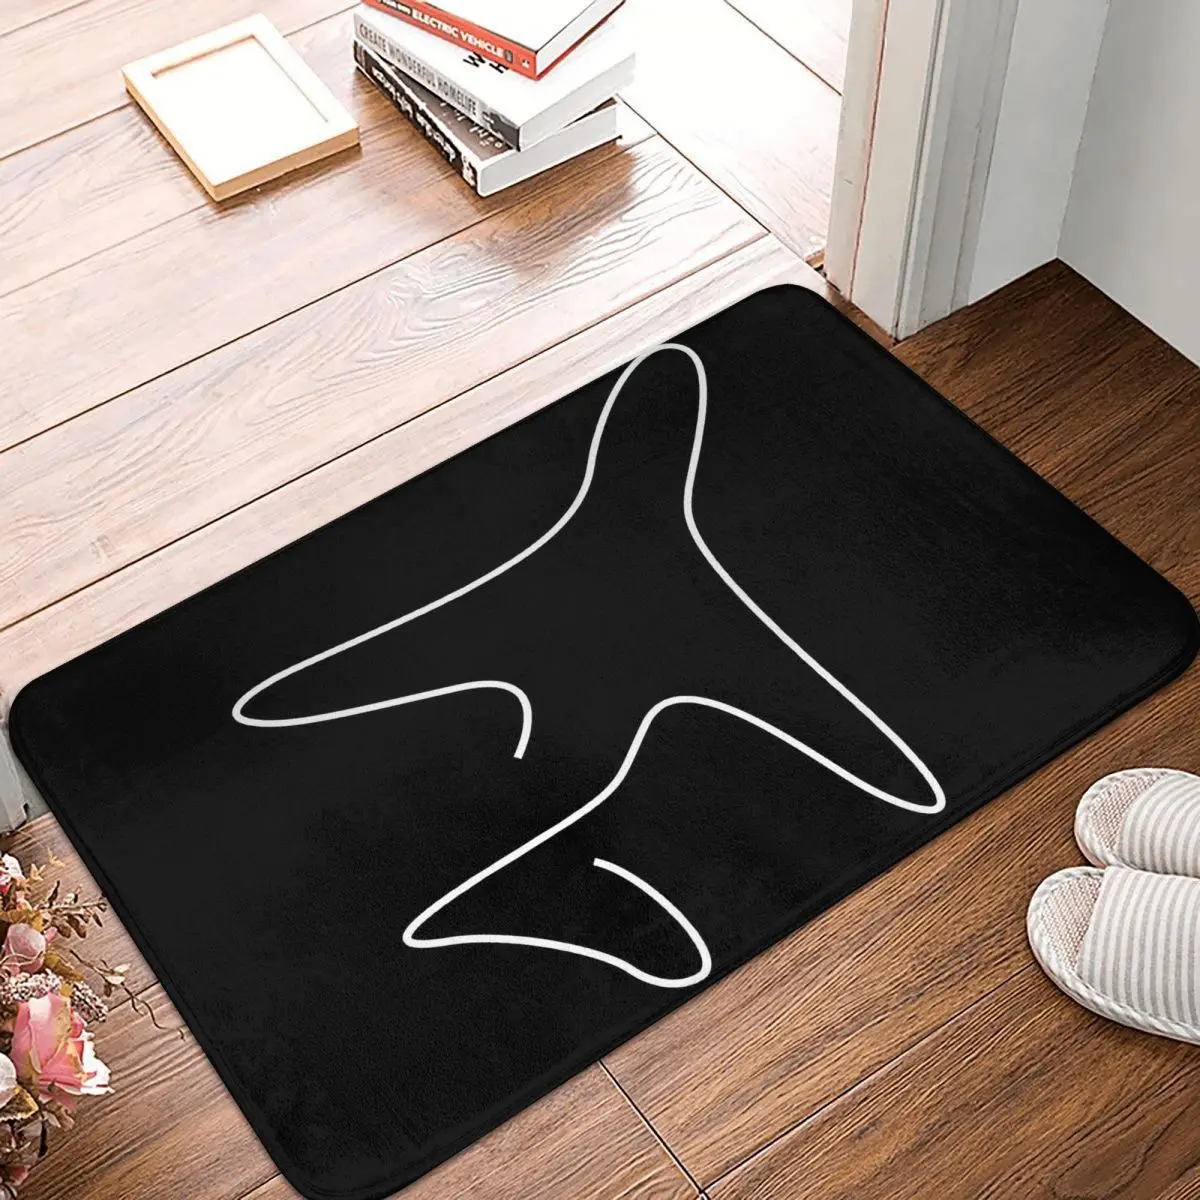 

White Line Plane Kitchen Non-Slip Carpet Airport Living Room Mat Welcome Doormat Home Decoration Rug